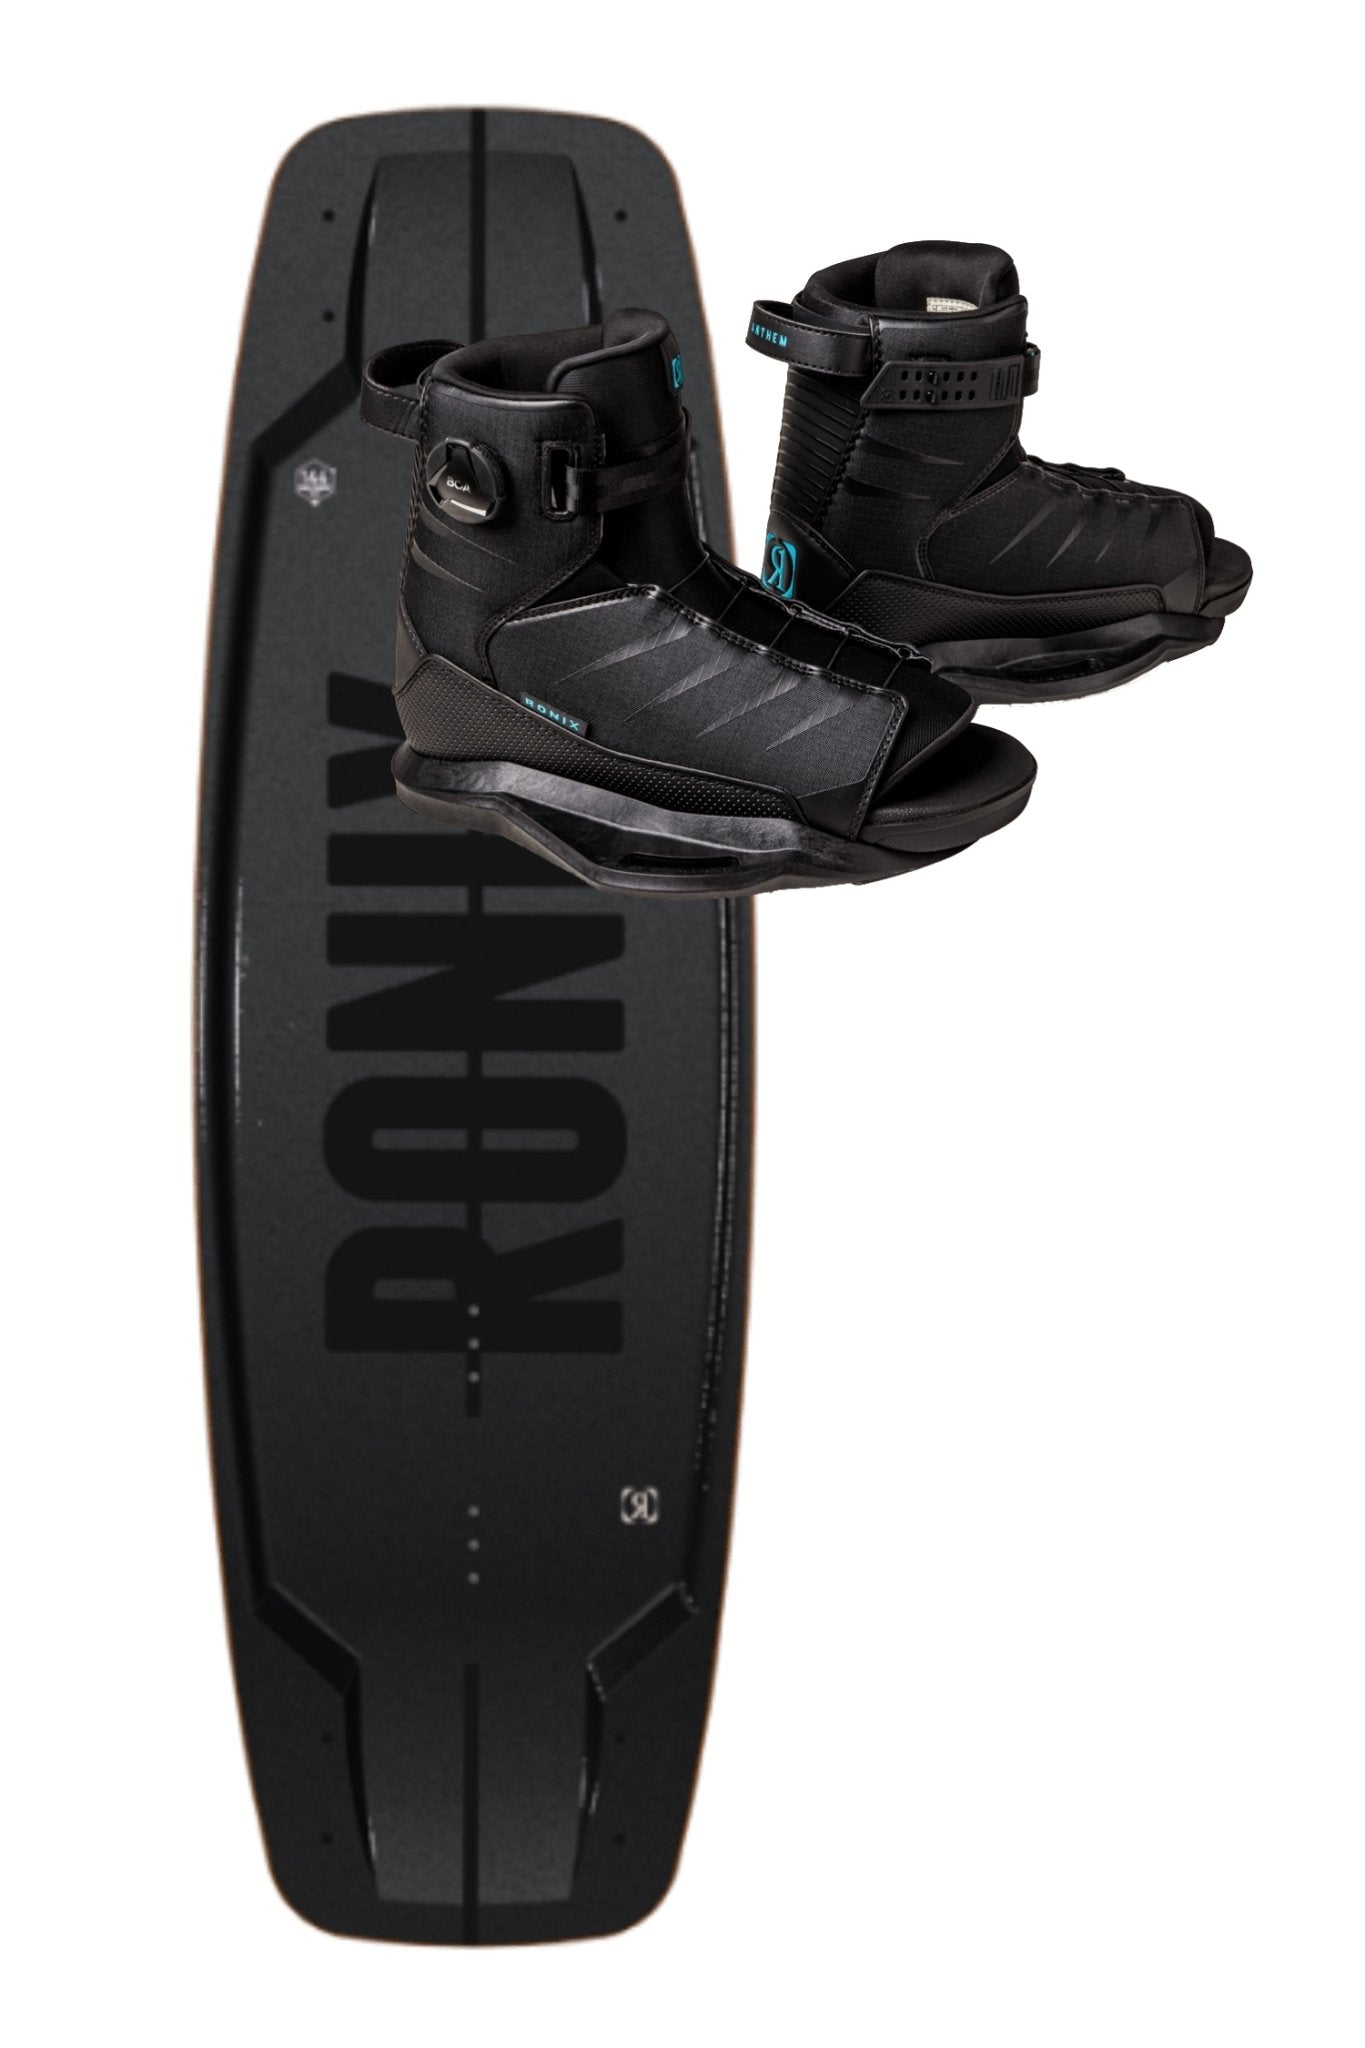 2023 Parks Wakeboard -Ronix232040-135-Anthem Boa-US 6 to 7